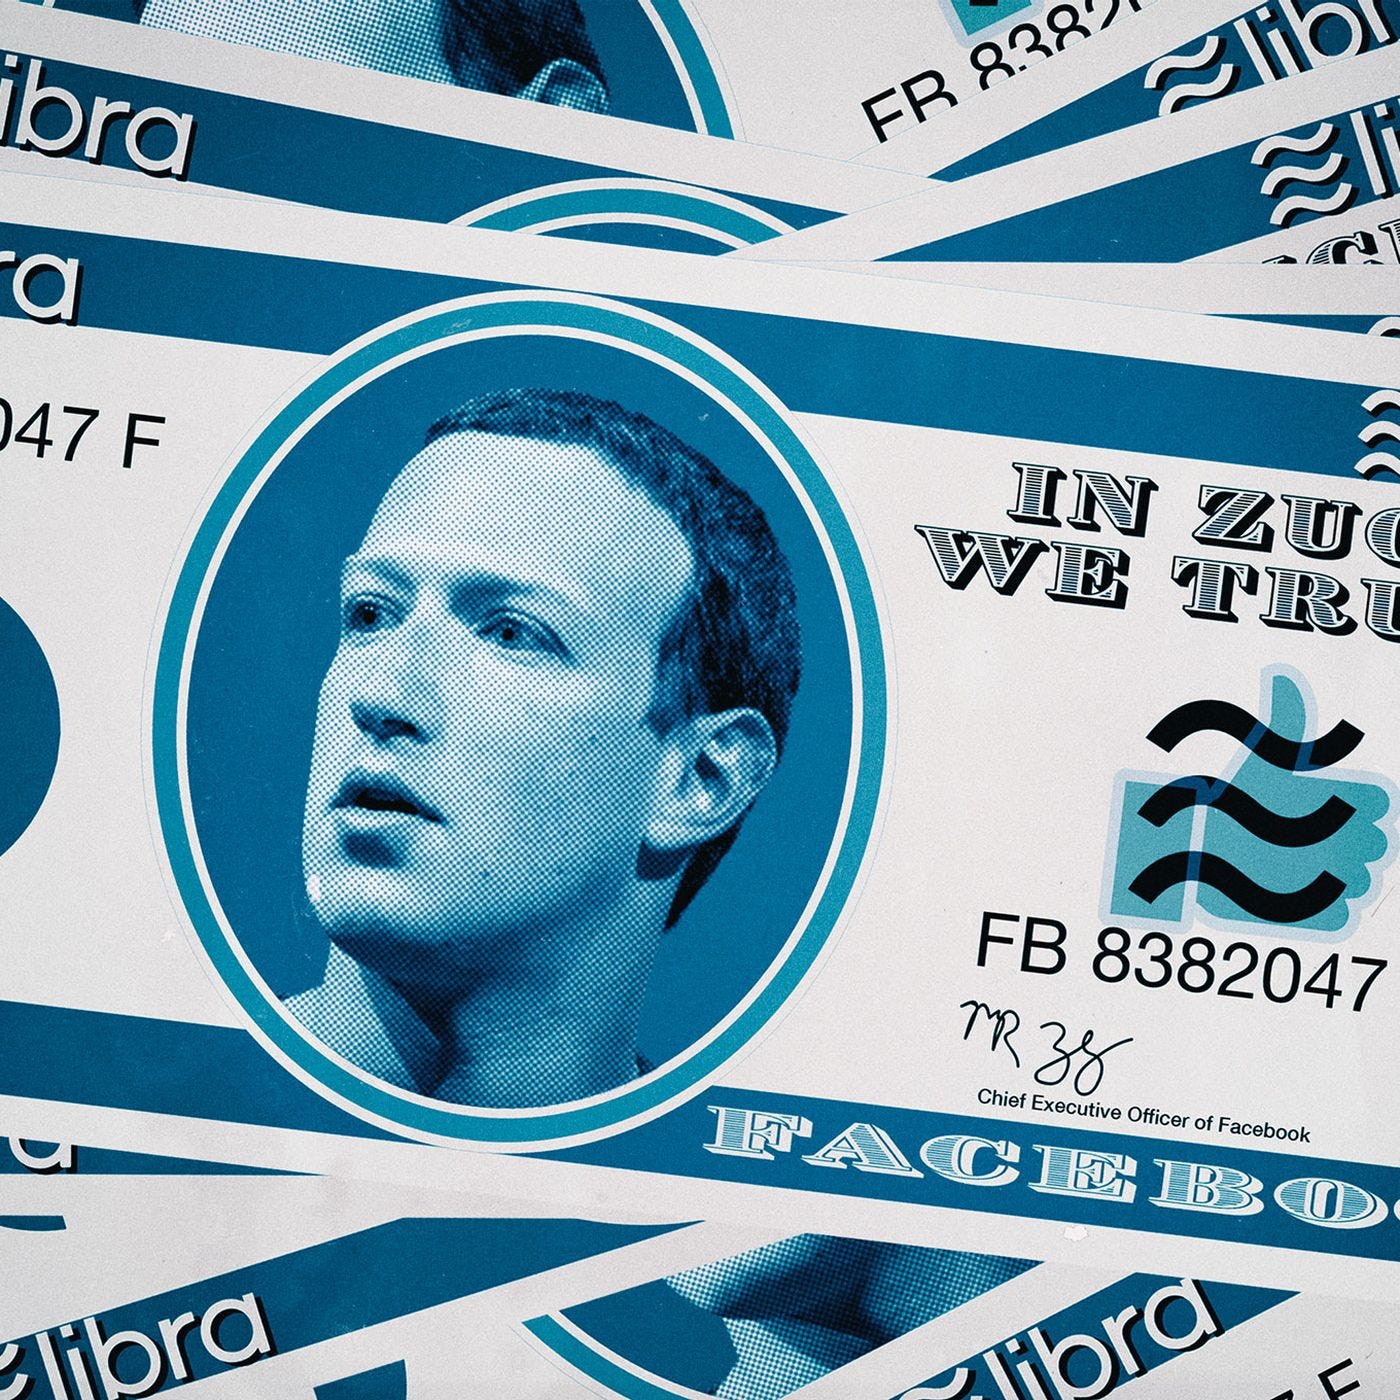 Facebook is shifting its Libra cryptocurrency plans after intense ...